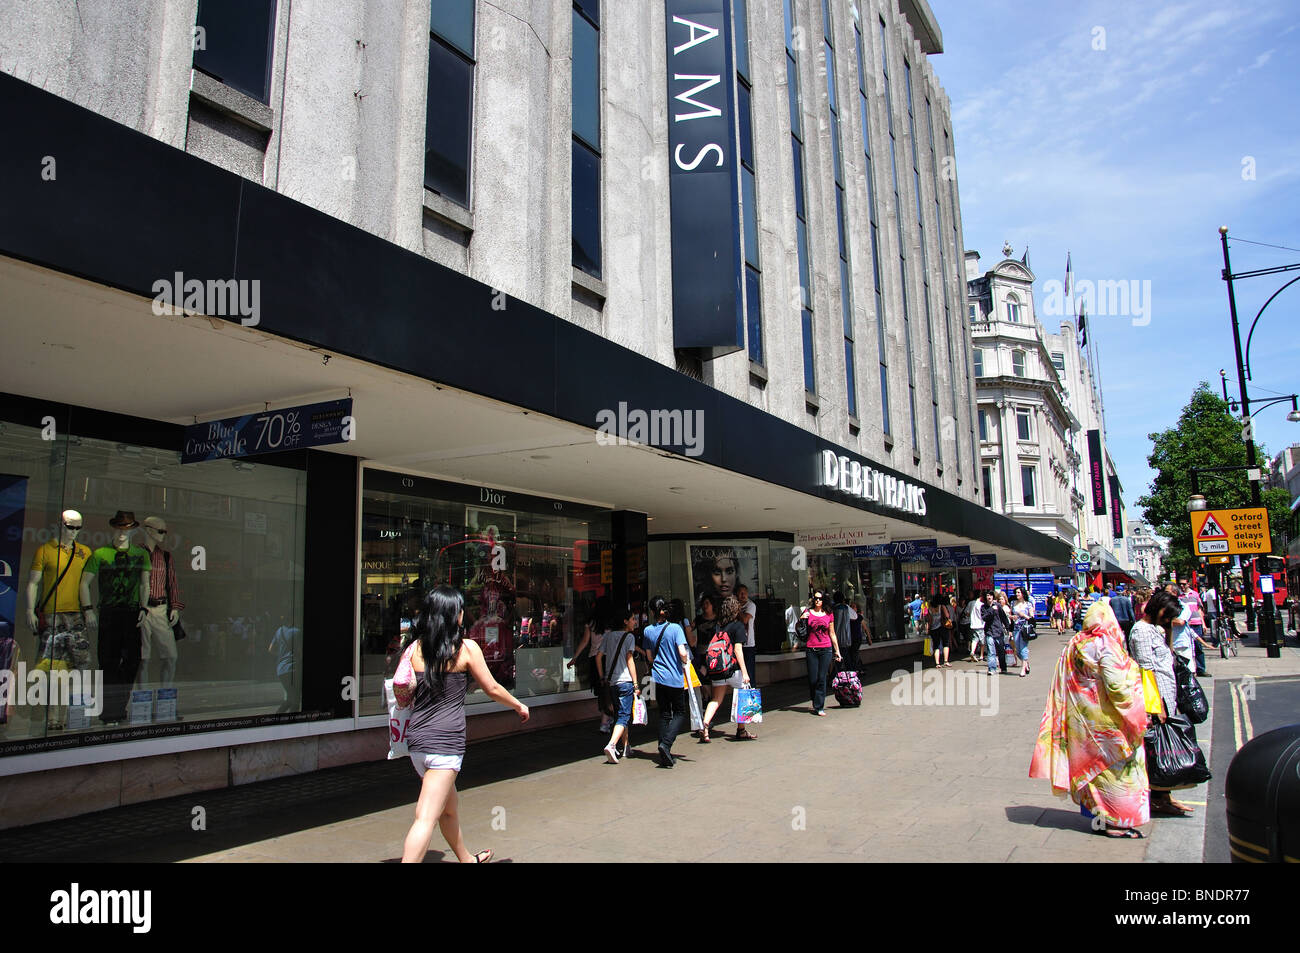 Debenhams Department Store, Oxford Street, West End, City of Westminster, London, England, United Kingdom Stock Photo